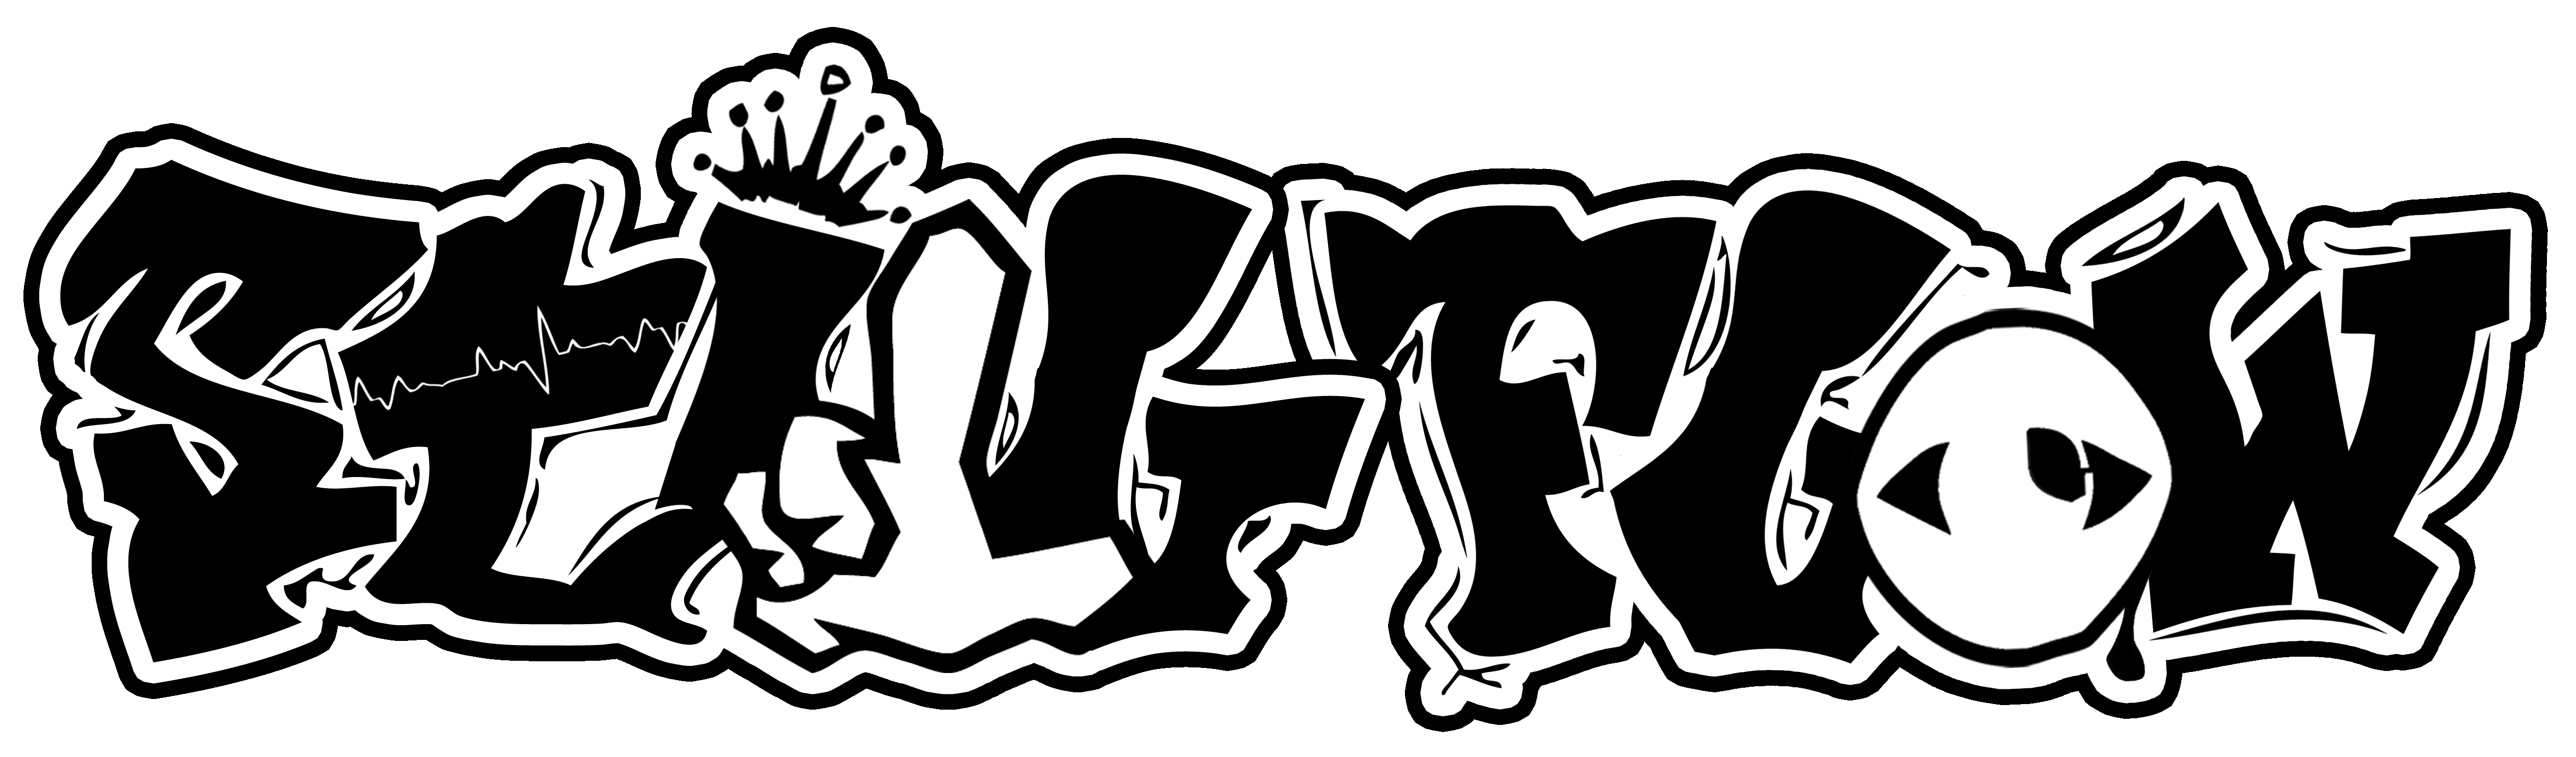 Words clipart graffiti. Logo ideas and client